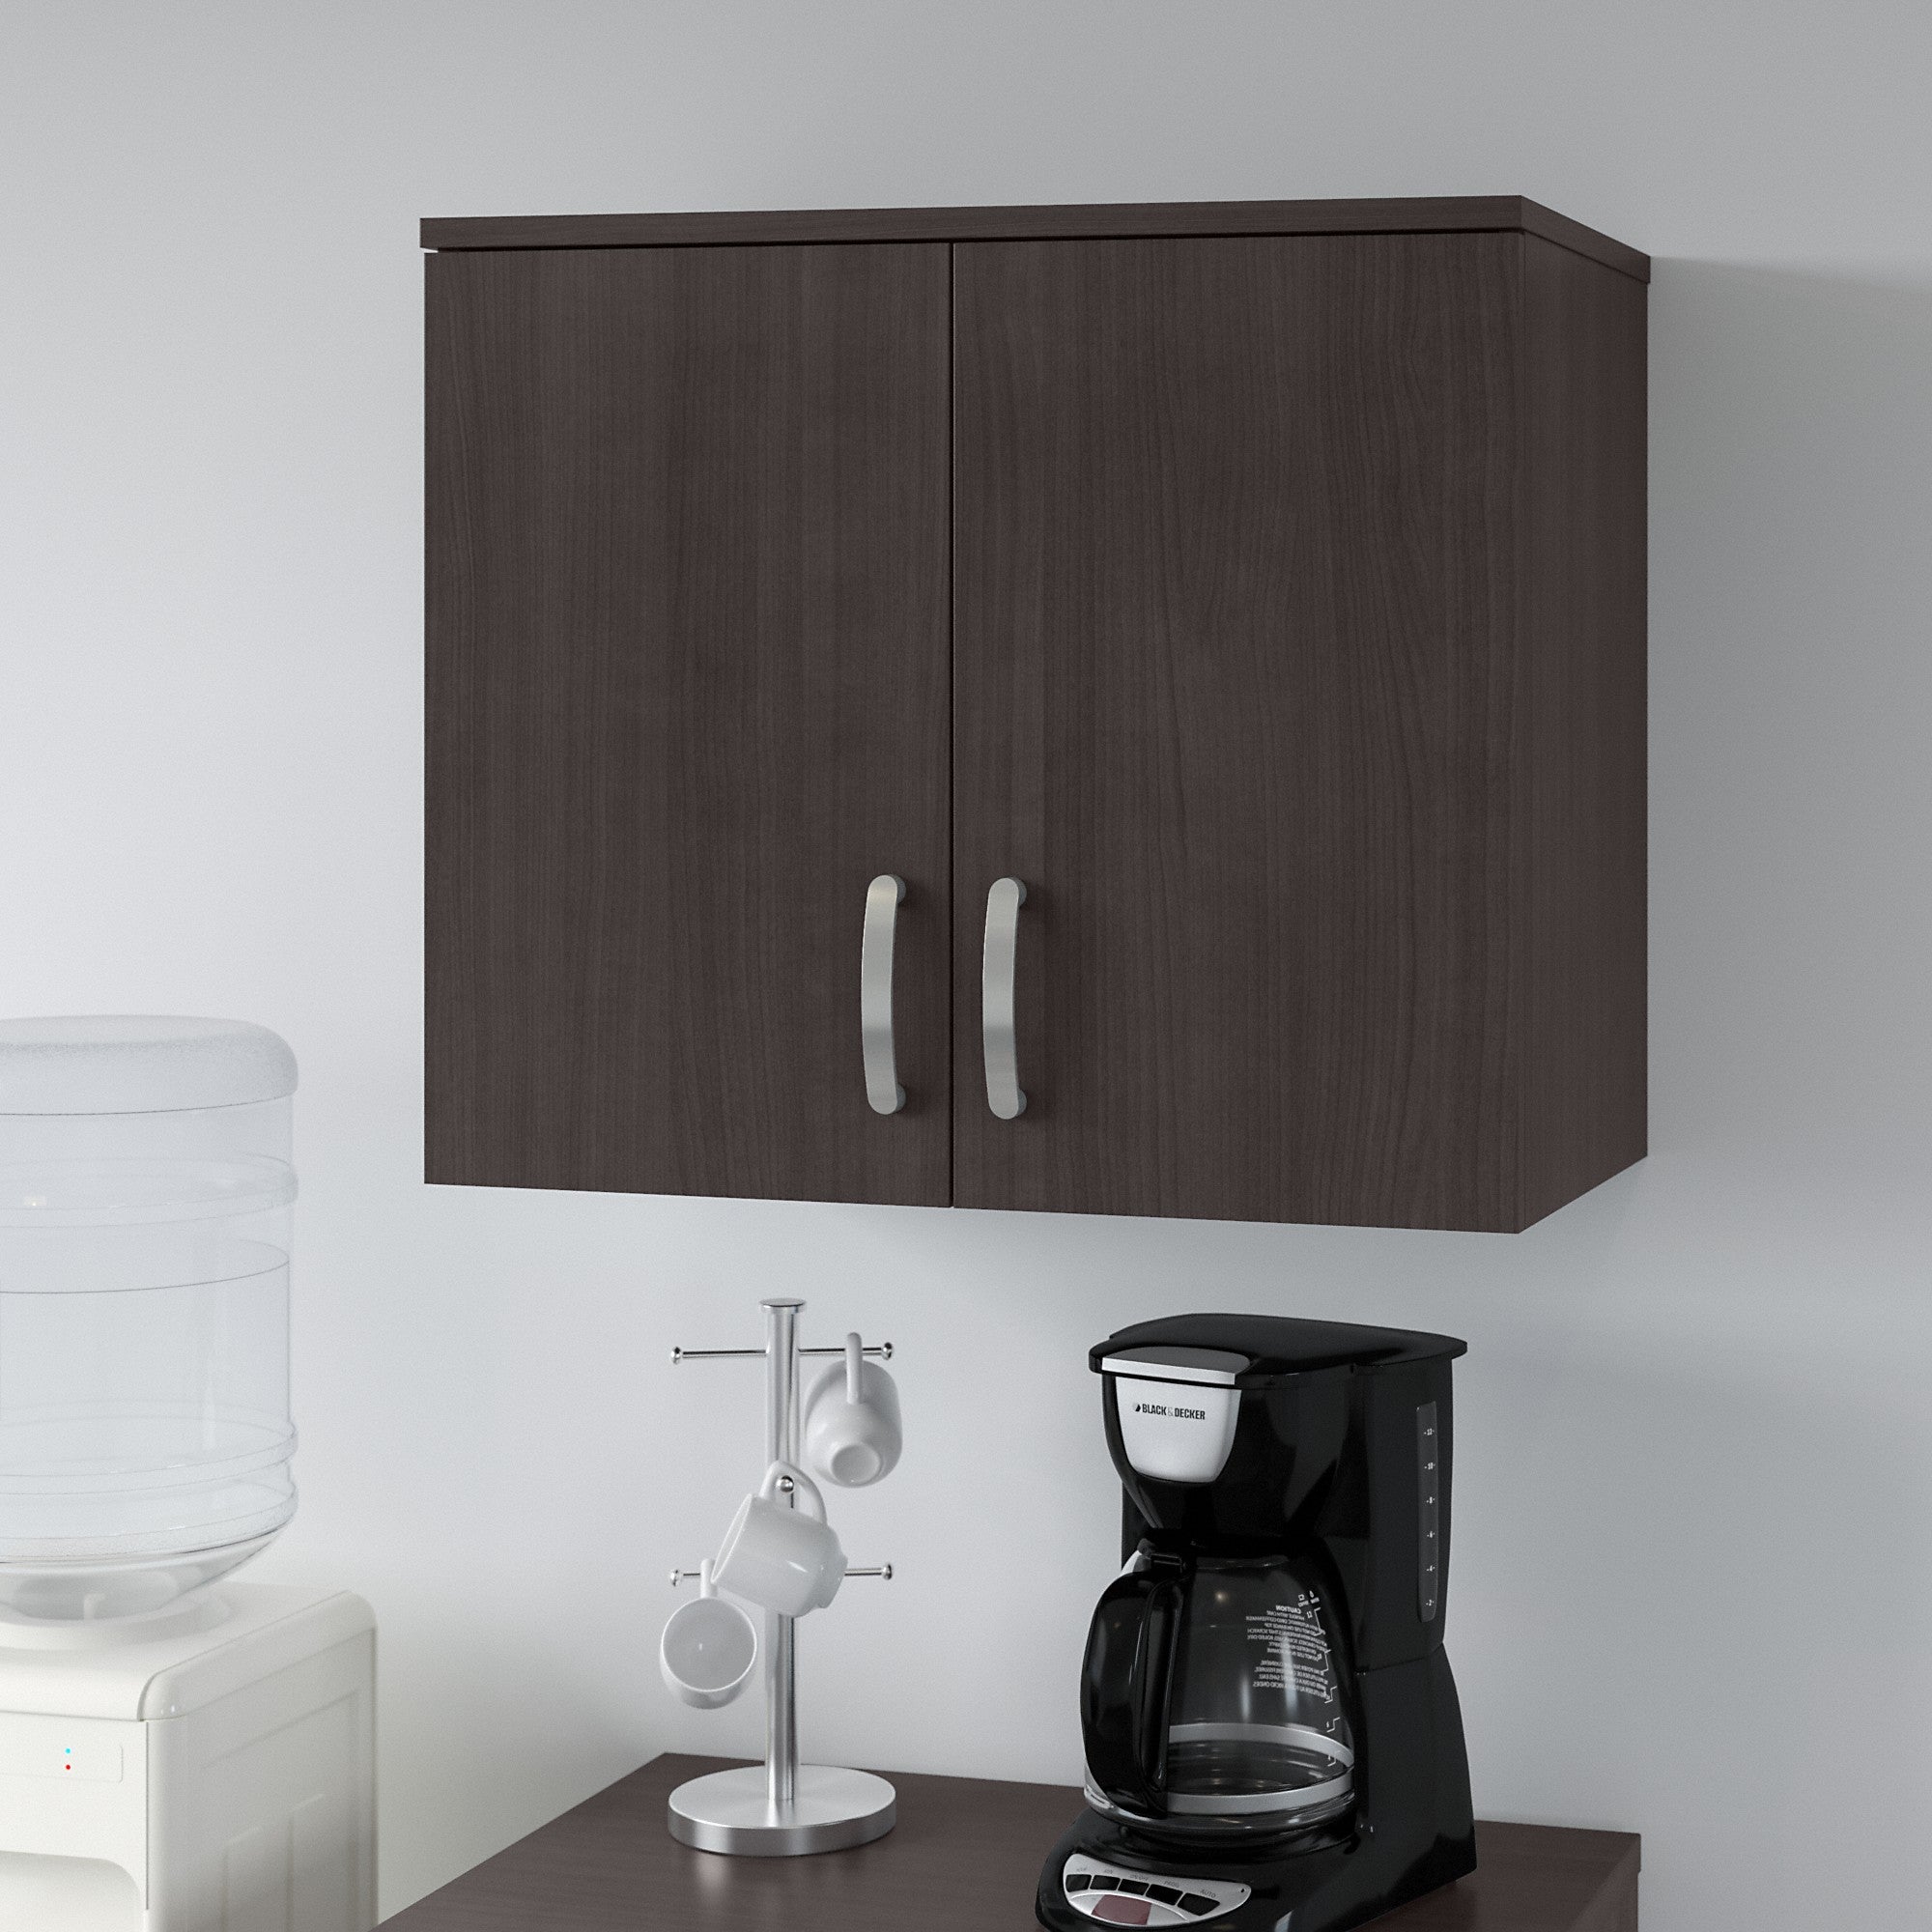 Bush Business Furniture Universal Wall Cabinet with Doors and Shelves